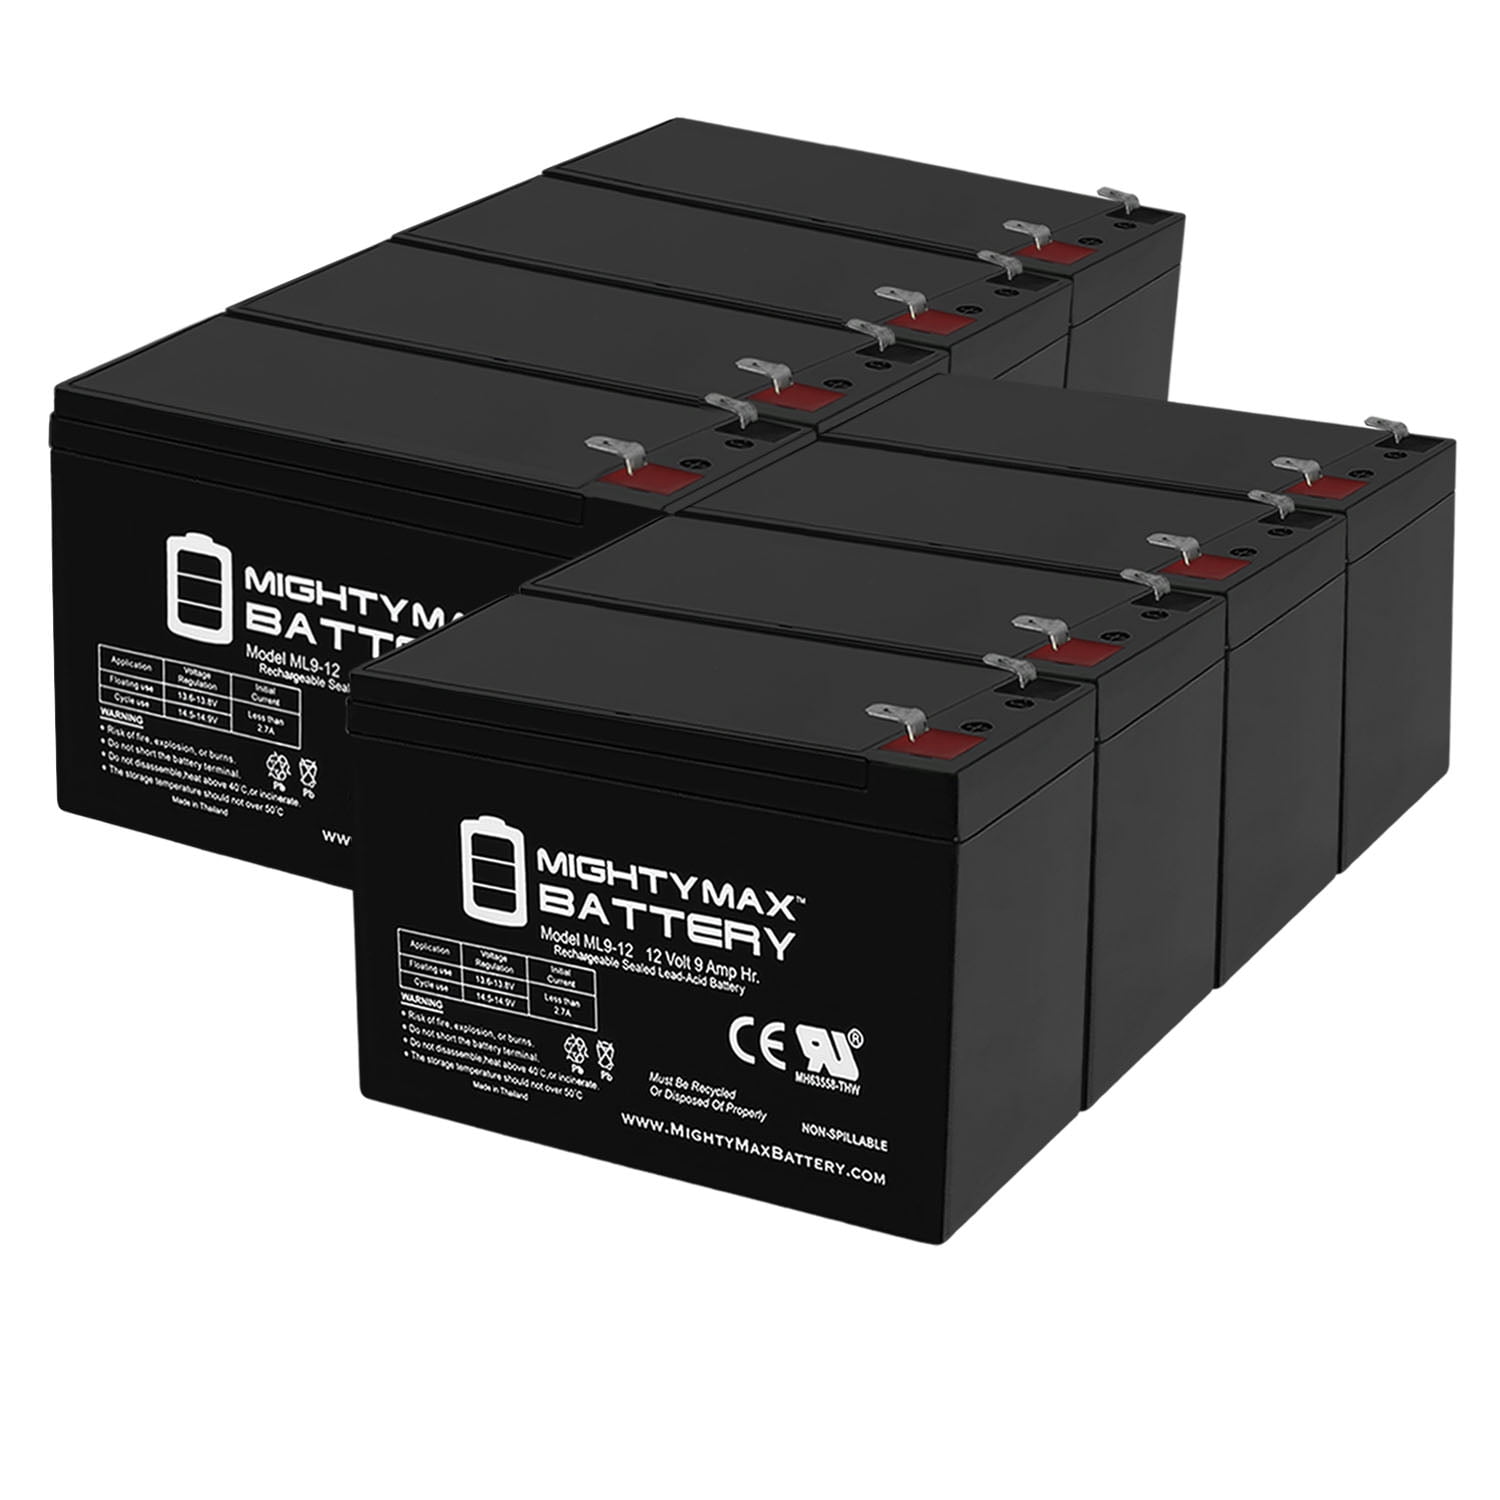 Mighty Max Battery 12V 9AH Replacement for Eaton PowerWare 5115 UPS 1000 VA 8 Pack Brand Product 